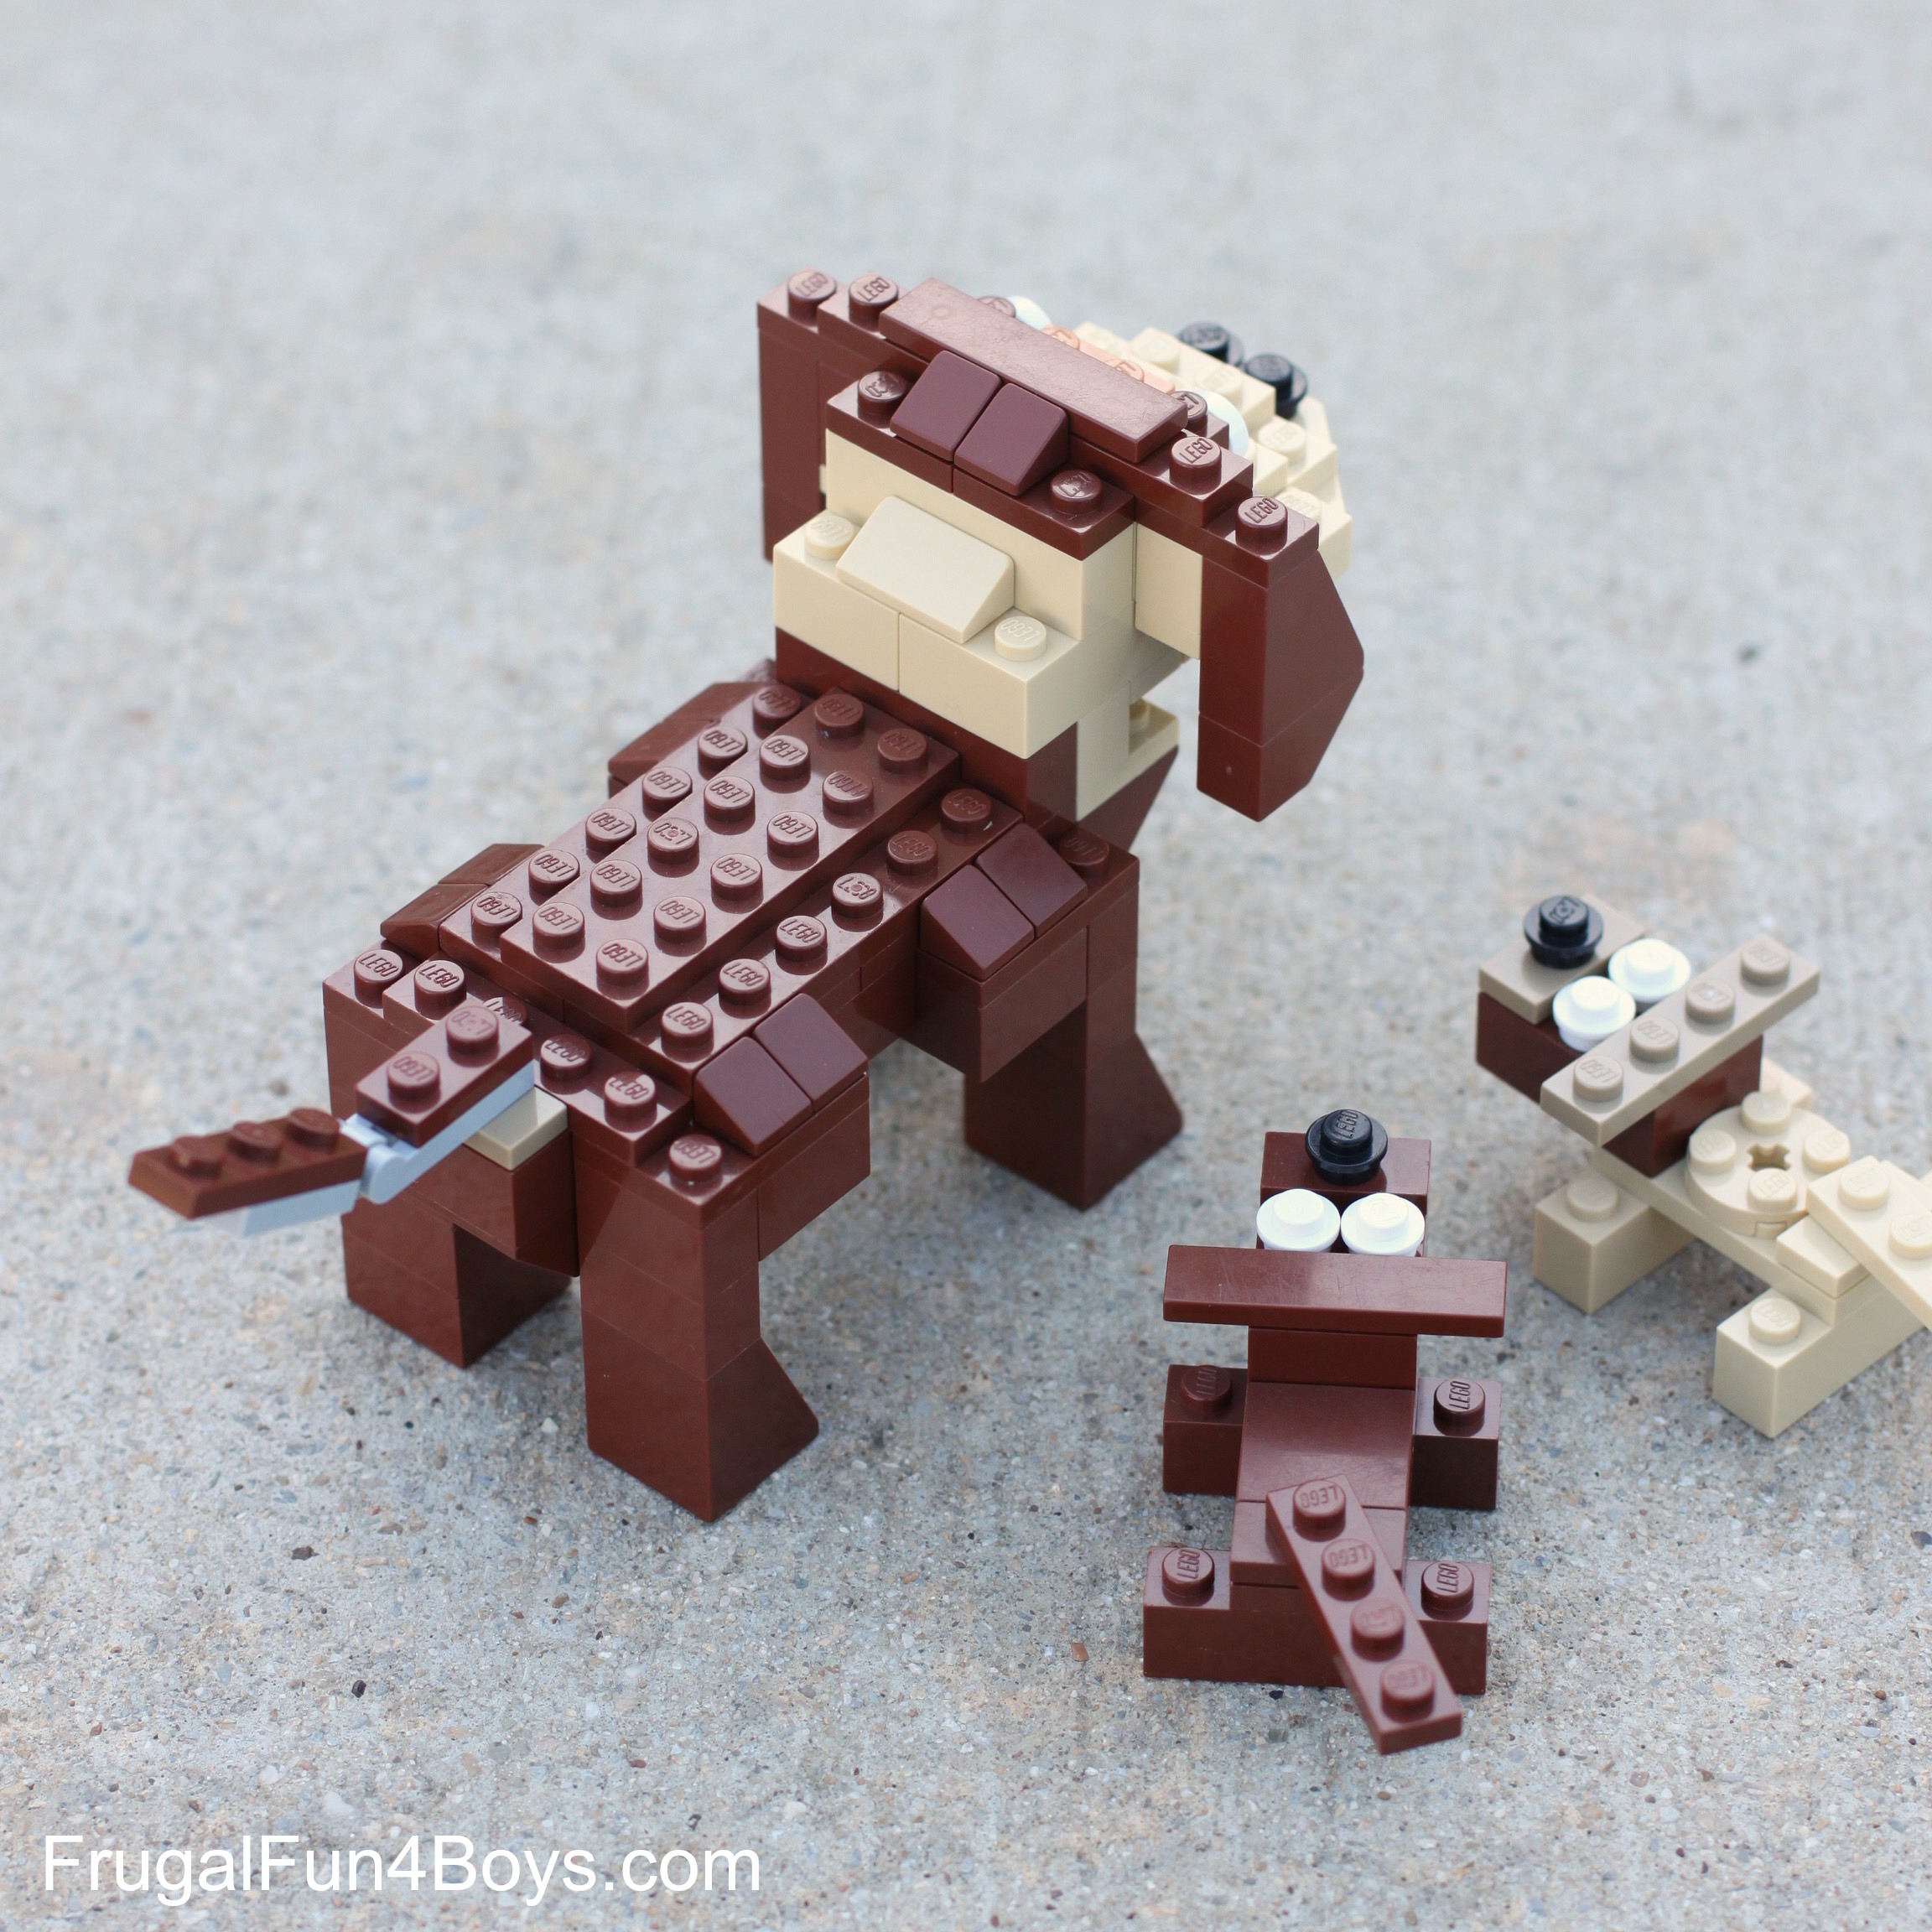 How to Build LEGO Dogs